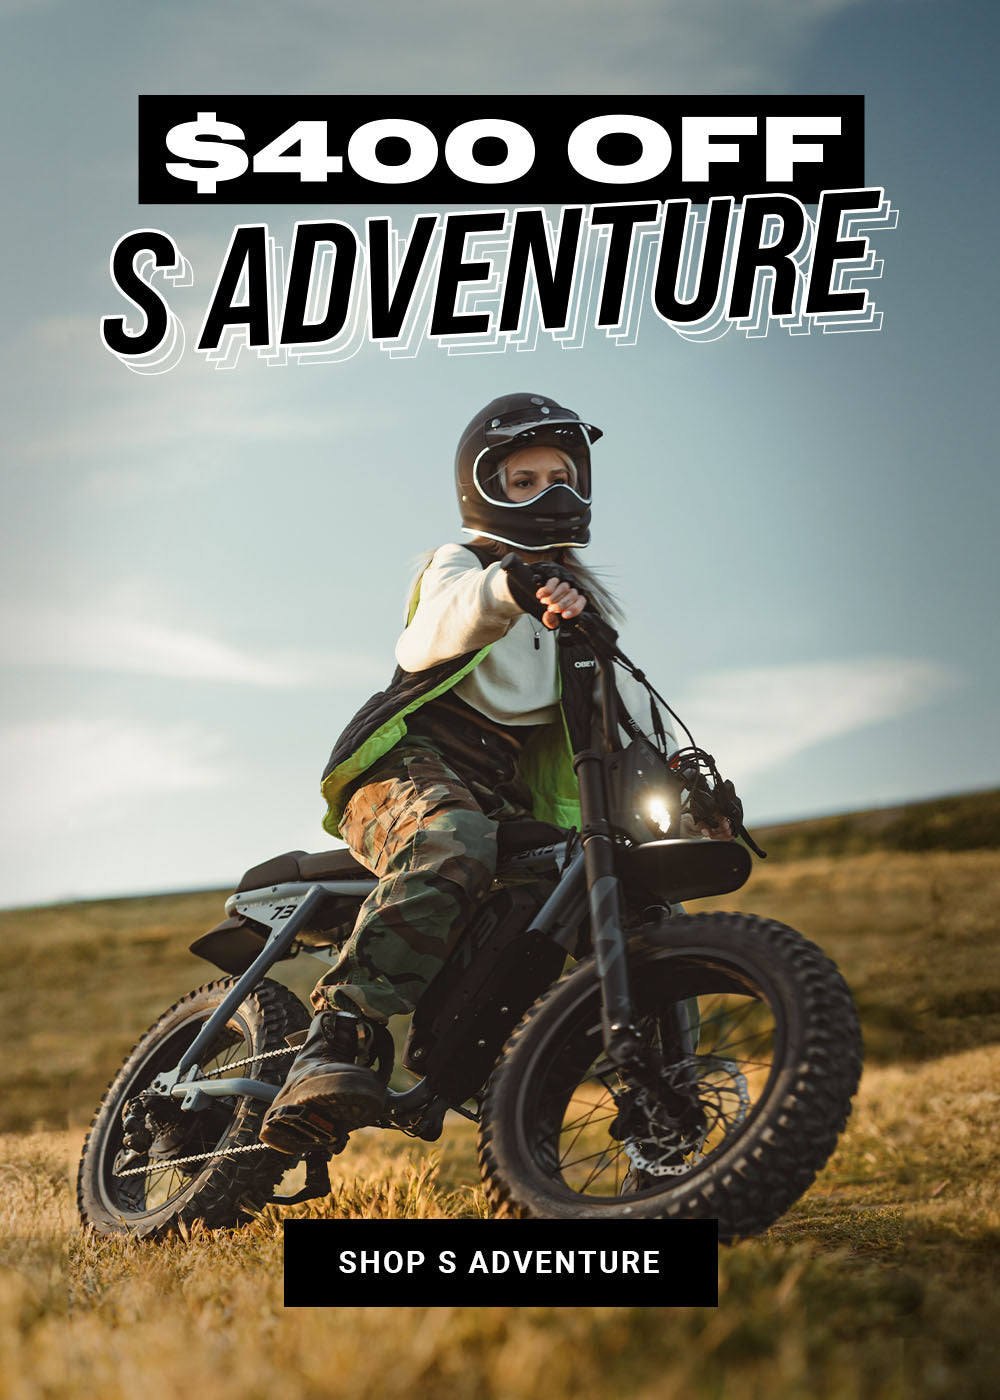 Promotional image of the S Adventure ebike at $400 off